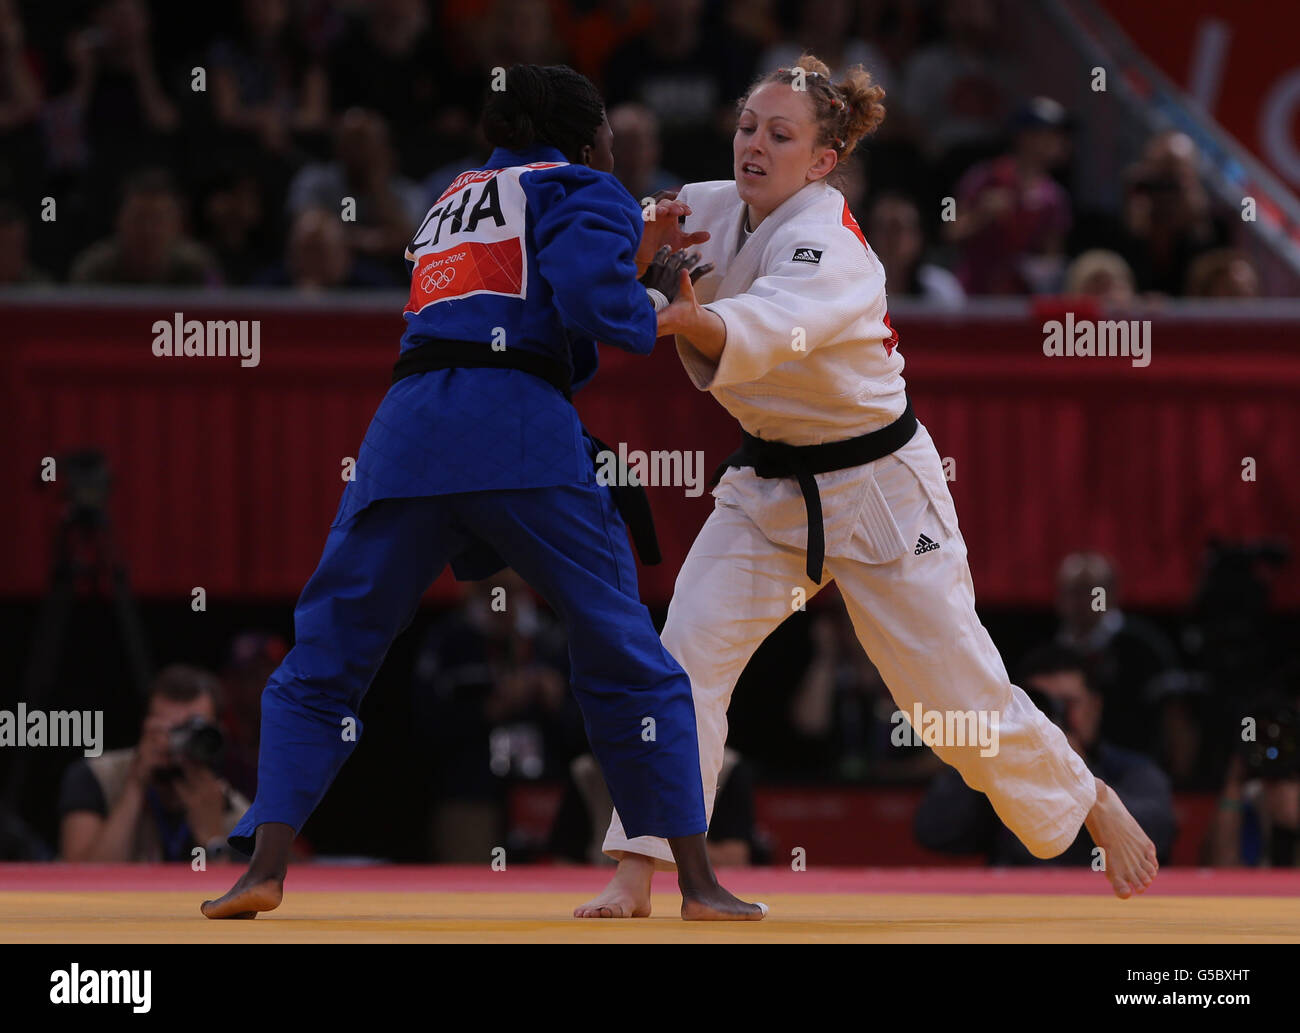 London Olympic Games - Day 5. Great Britain's Sally Conway during her win over Chad's Carine Ngarlemdana at The ExCel Arena, London. Stock Photo